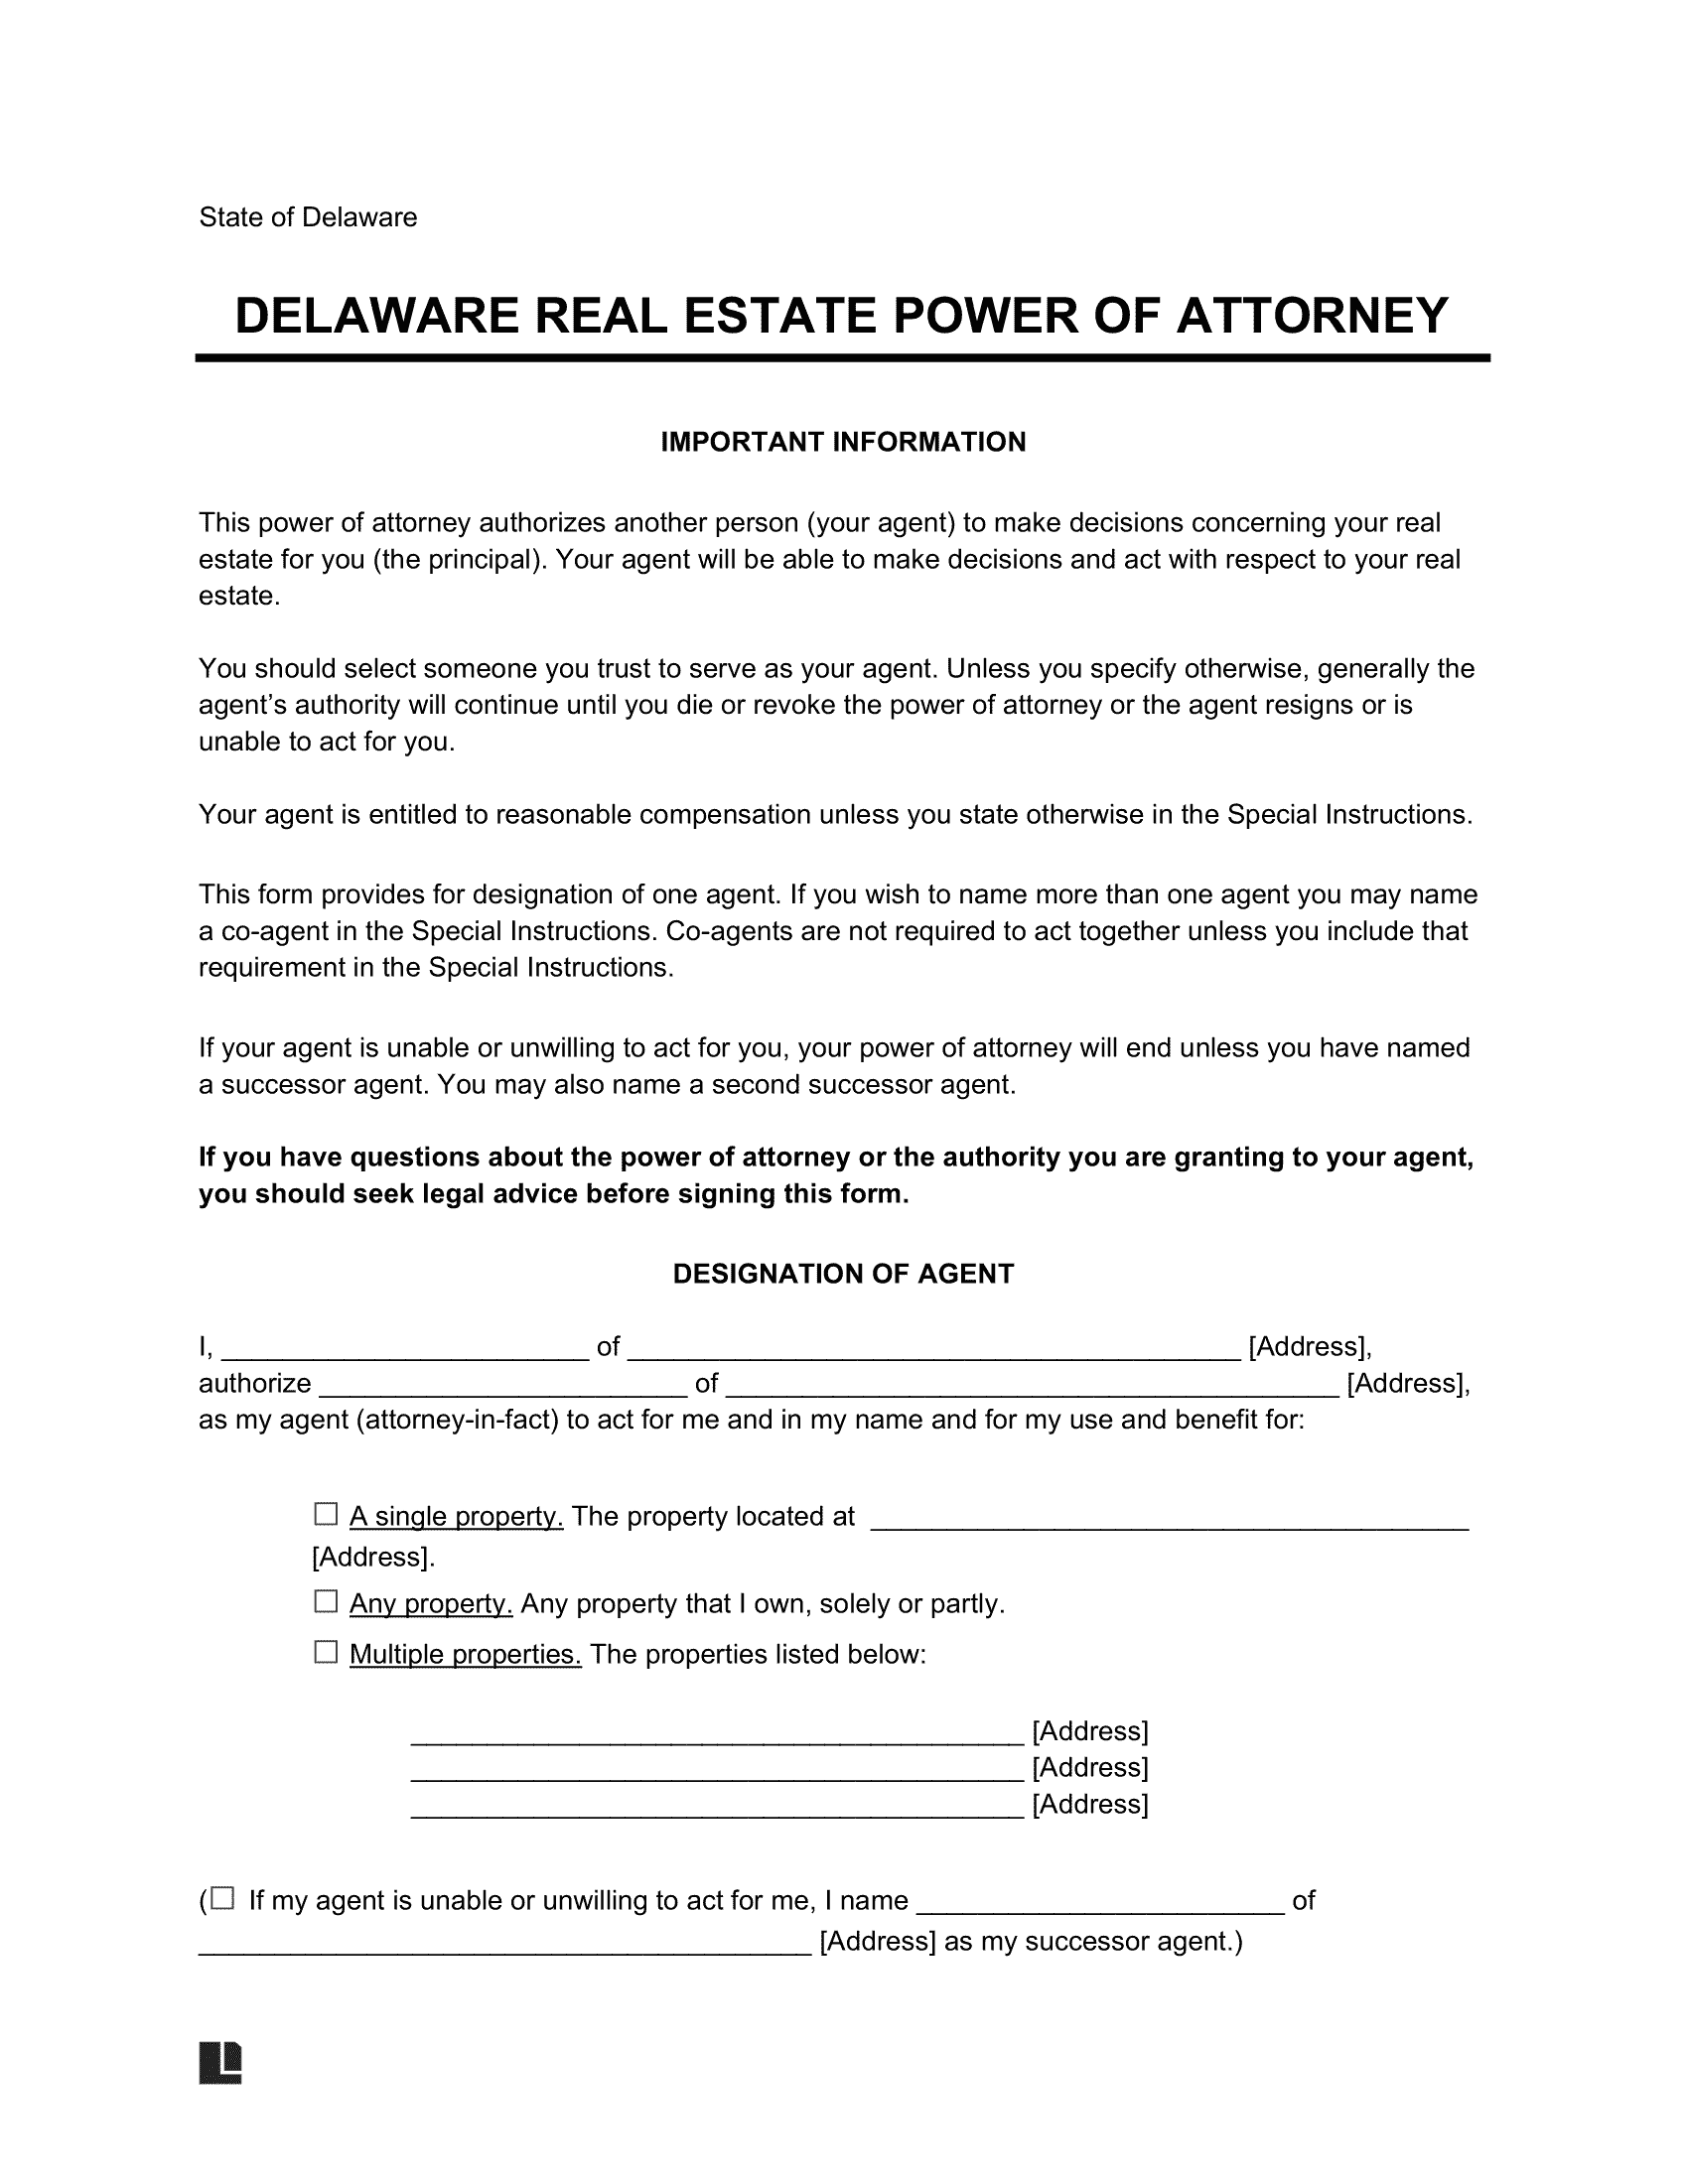 Delaware Real Estate Power of Attorney Form